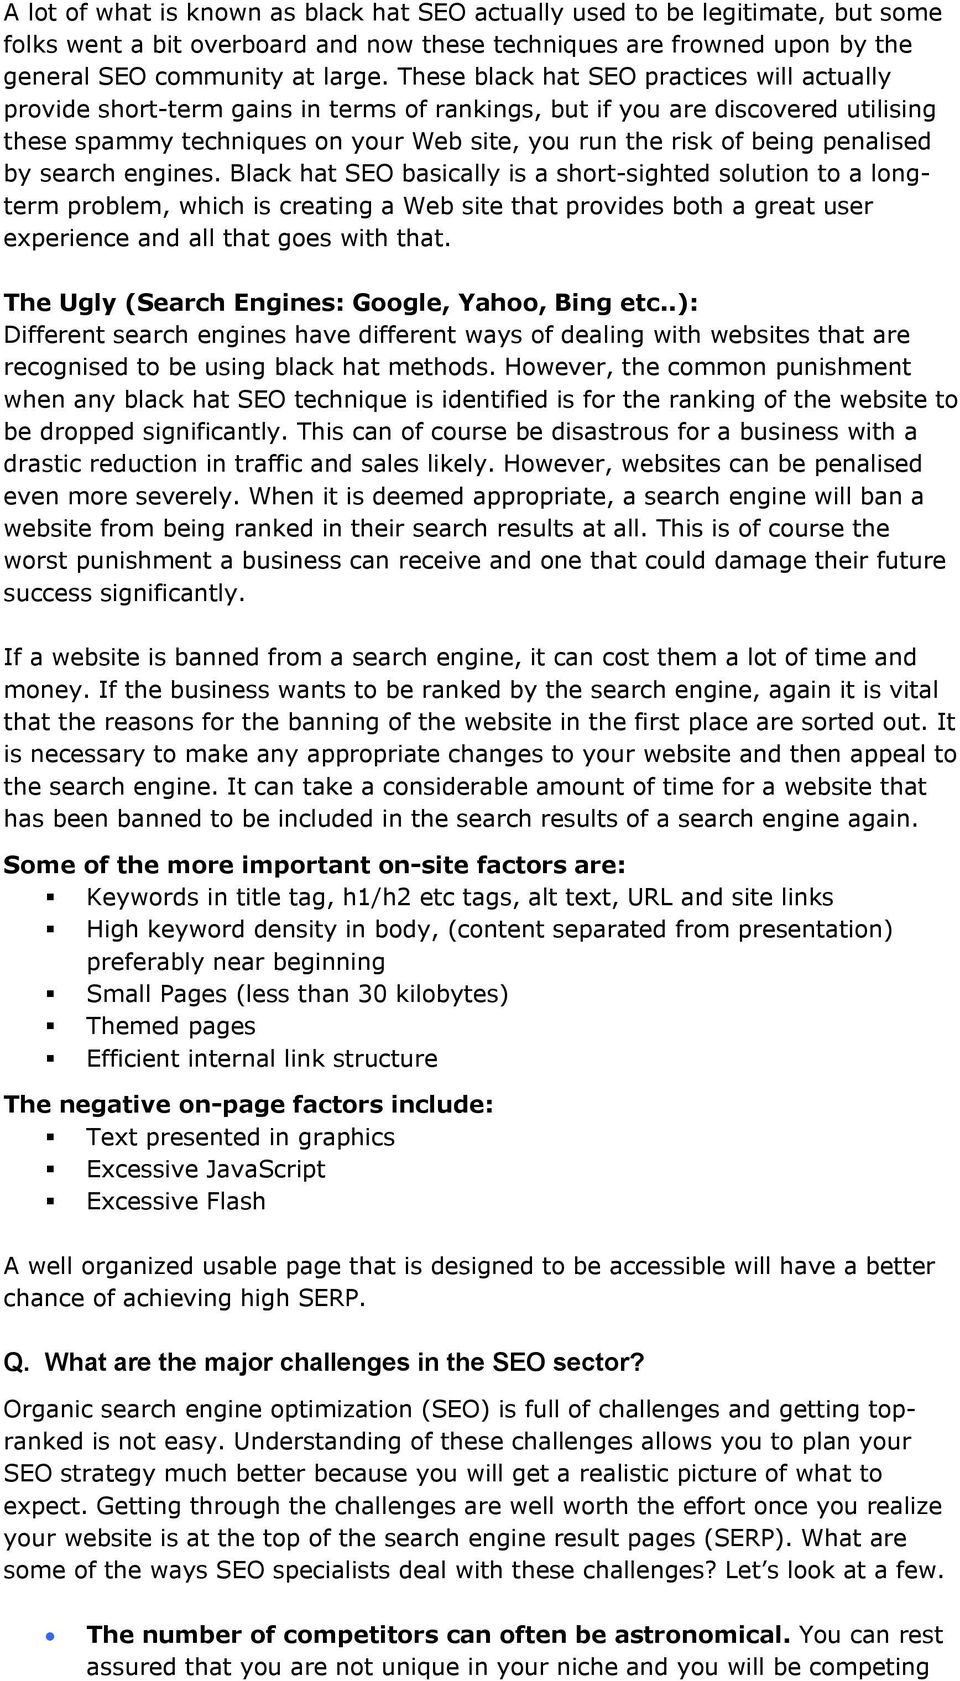 penalised by search engines.